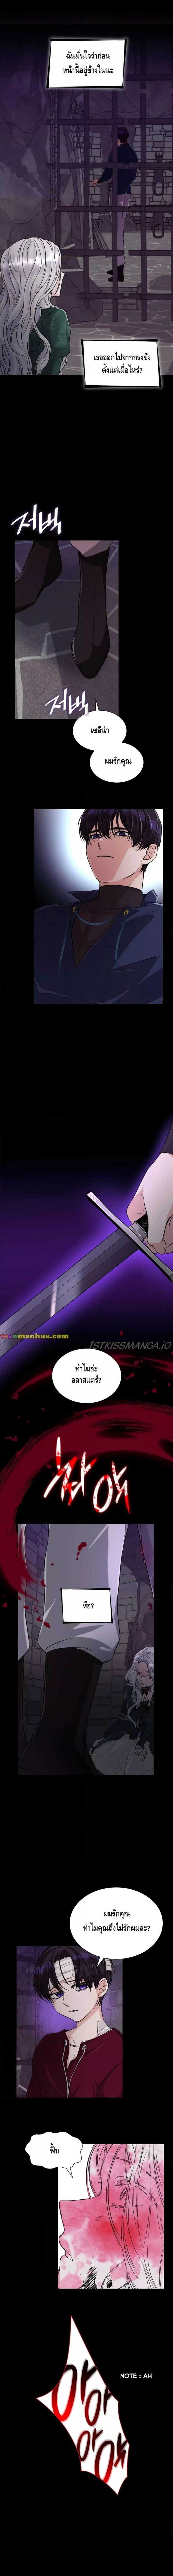 I-Lost-the-Leash-of-the-Yandere-Male-Lead-28-6.jpg